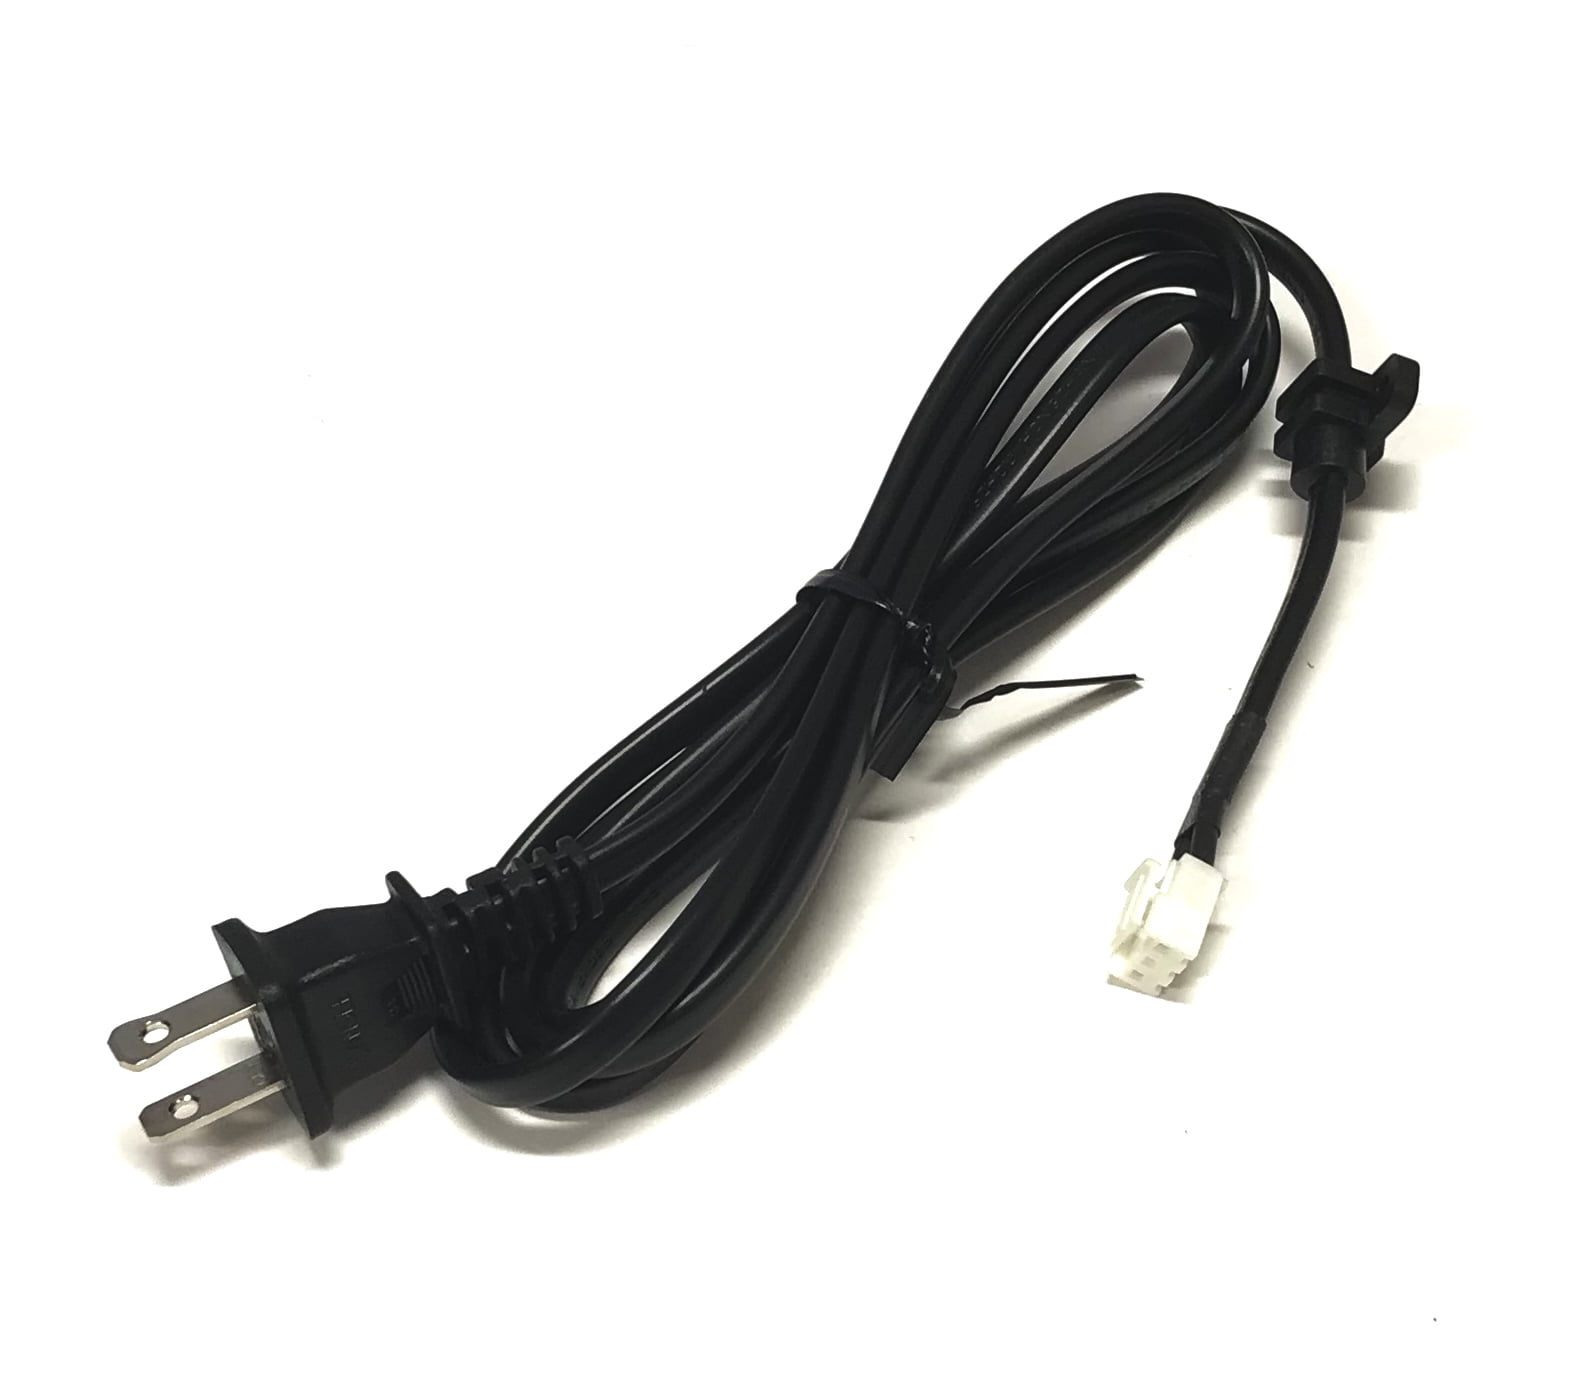 50H5C 43H7C2 43CU6100 OEM Hisense Power Cord Cable USA Only Originally Shipped With 50H8C 55H7C 